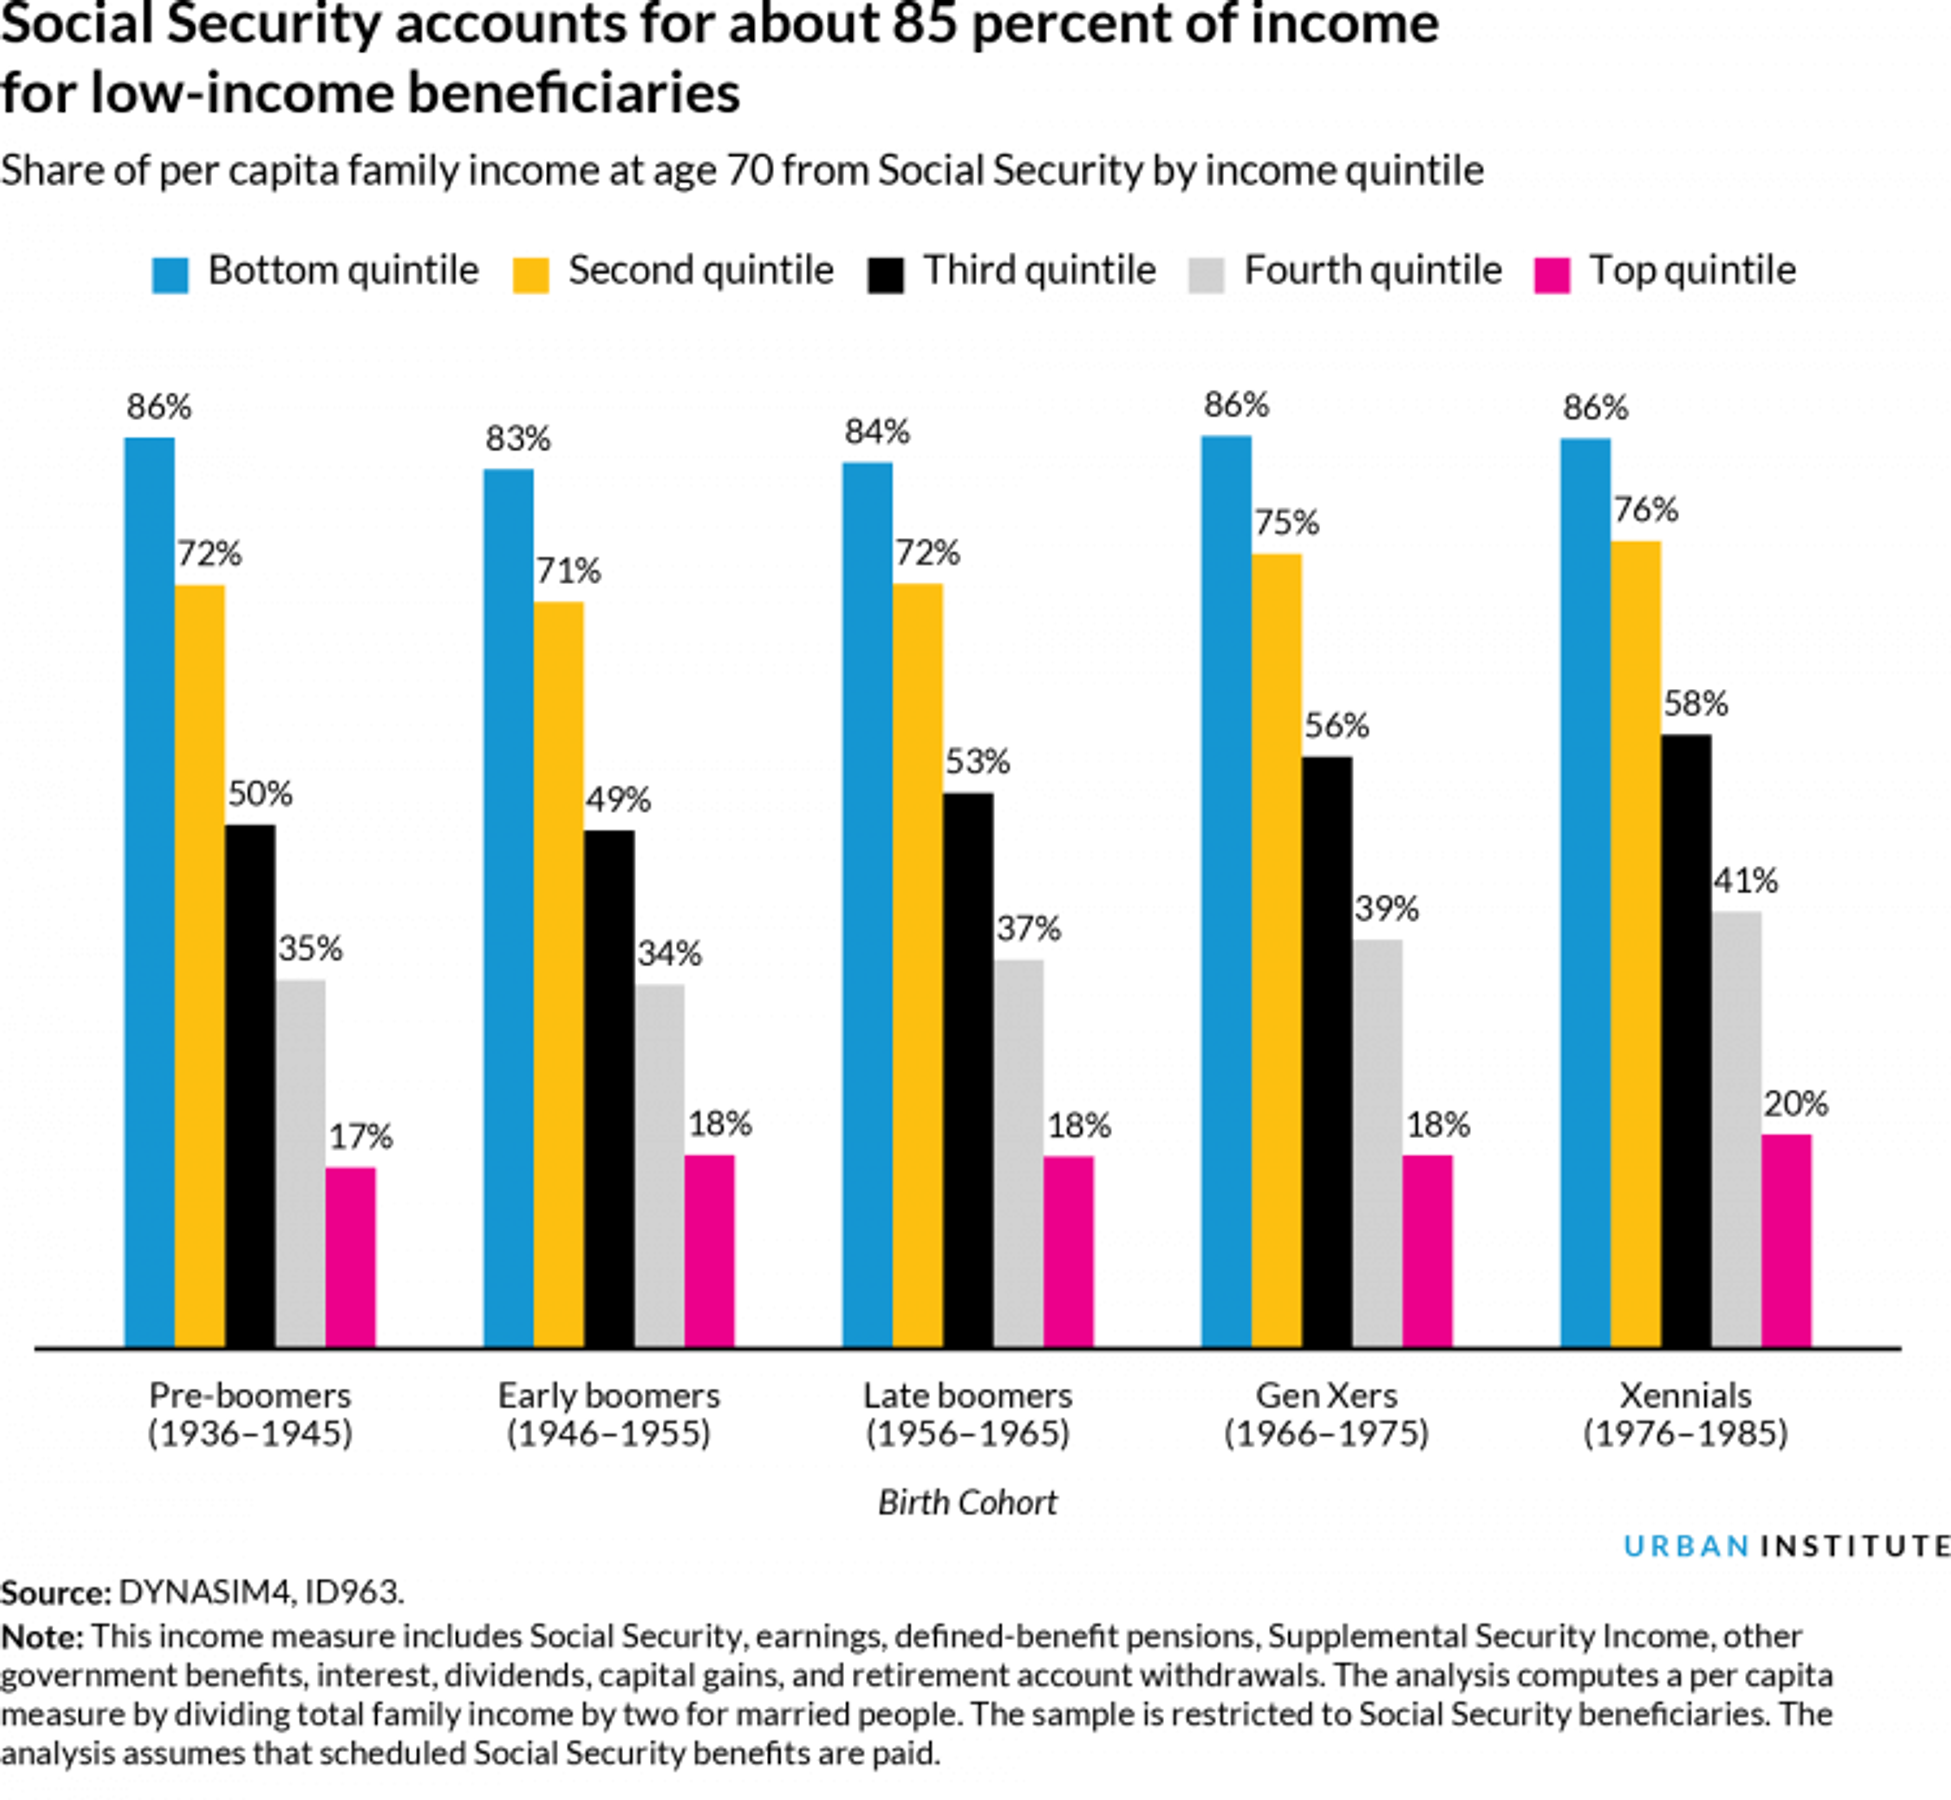 Chart showing that Social Social makes up about 85 percent of income for low-income beneficiaries